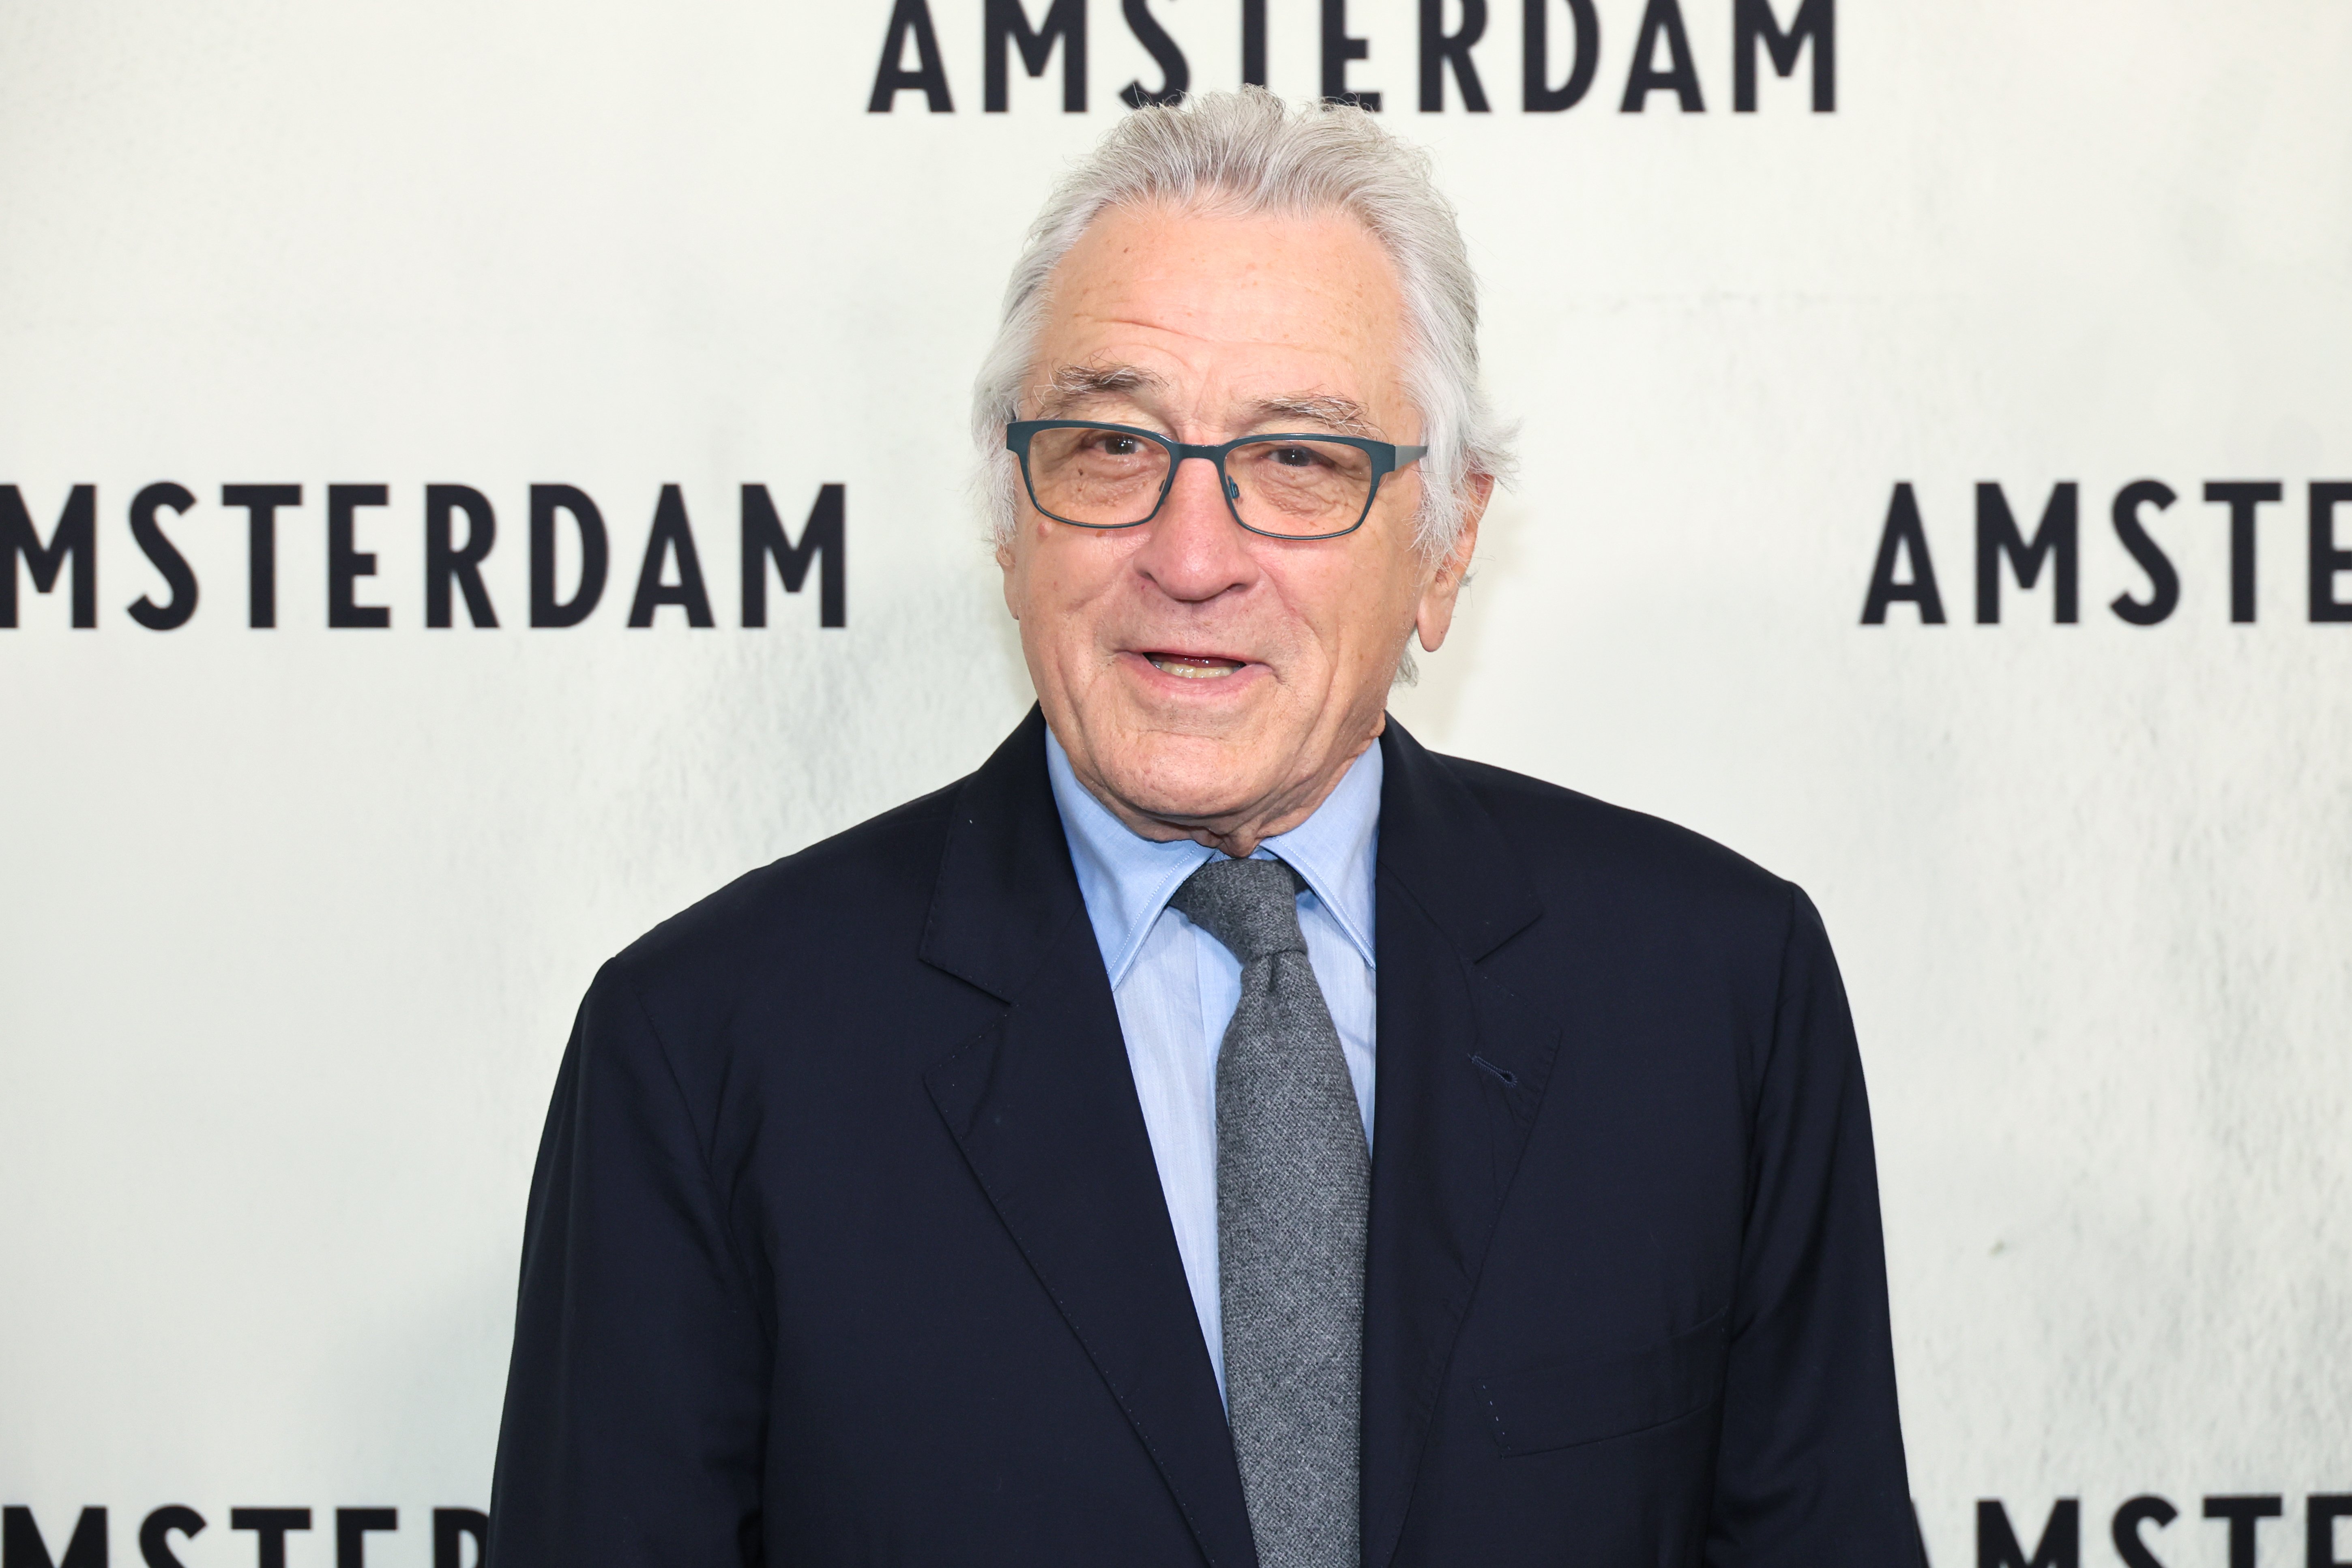 Robert De Niro attends the "Amsterdam" world premiere at Alice Tully Hall on September 18, 2022, in New York City. | Source: Getty Images